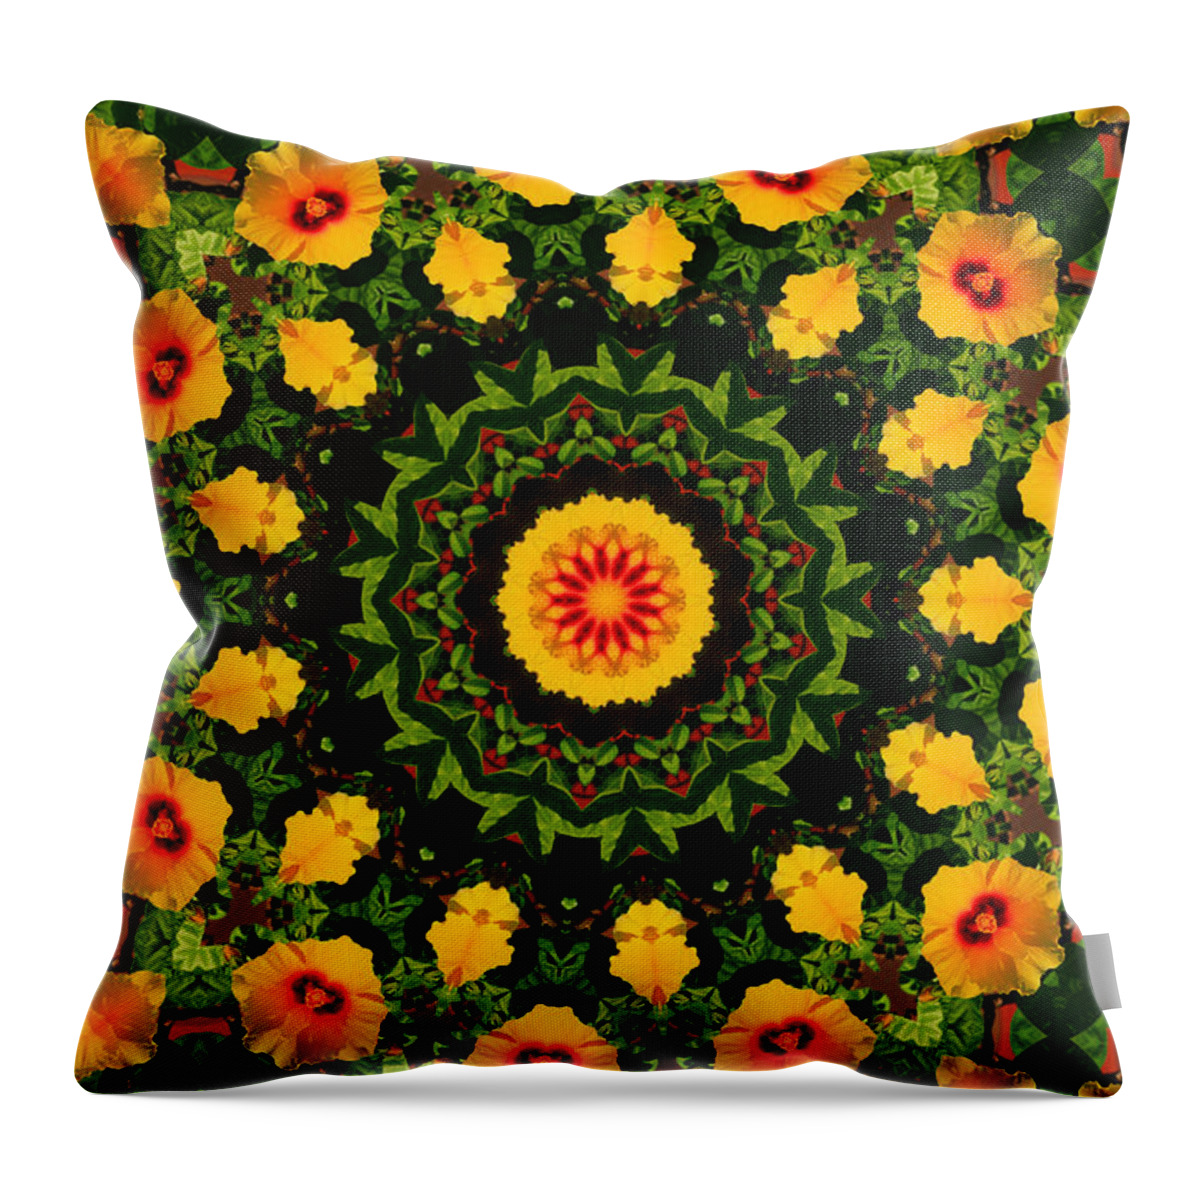 Hibiscus Throw Pillow featuring the photograph Hibiscus Kaleidoscope by Bill Barber